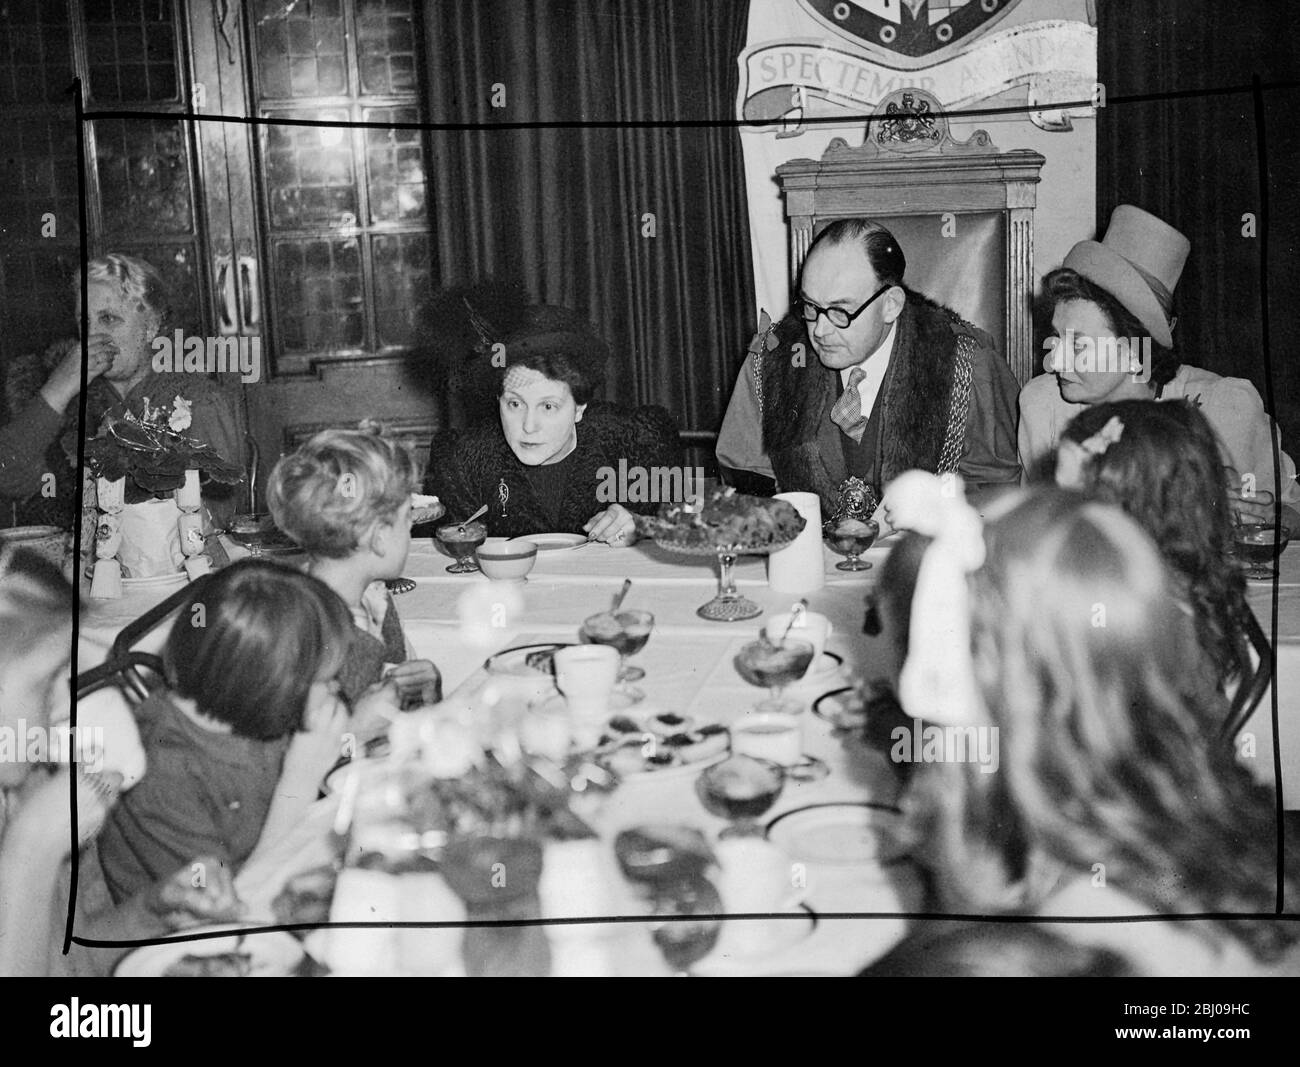 One hundred children of Lambeth, London, whose parents received Christmas parcels of food from Australia, were entertained by the Mayor of Lambeth, Cllr Simpson today, at Lambeth Town Hall. - Picture shows: left to right Mr Norman Martin - Agent General for Victoria, Mrs Norman Martin, Cllr Simpson , mayor of Lambeth, Mrs Simpson, Mr Wilson, and Mrs Wilson as the party today. - 20 December 1947 Stock Photo